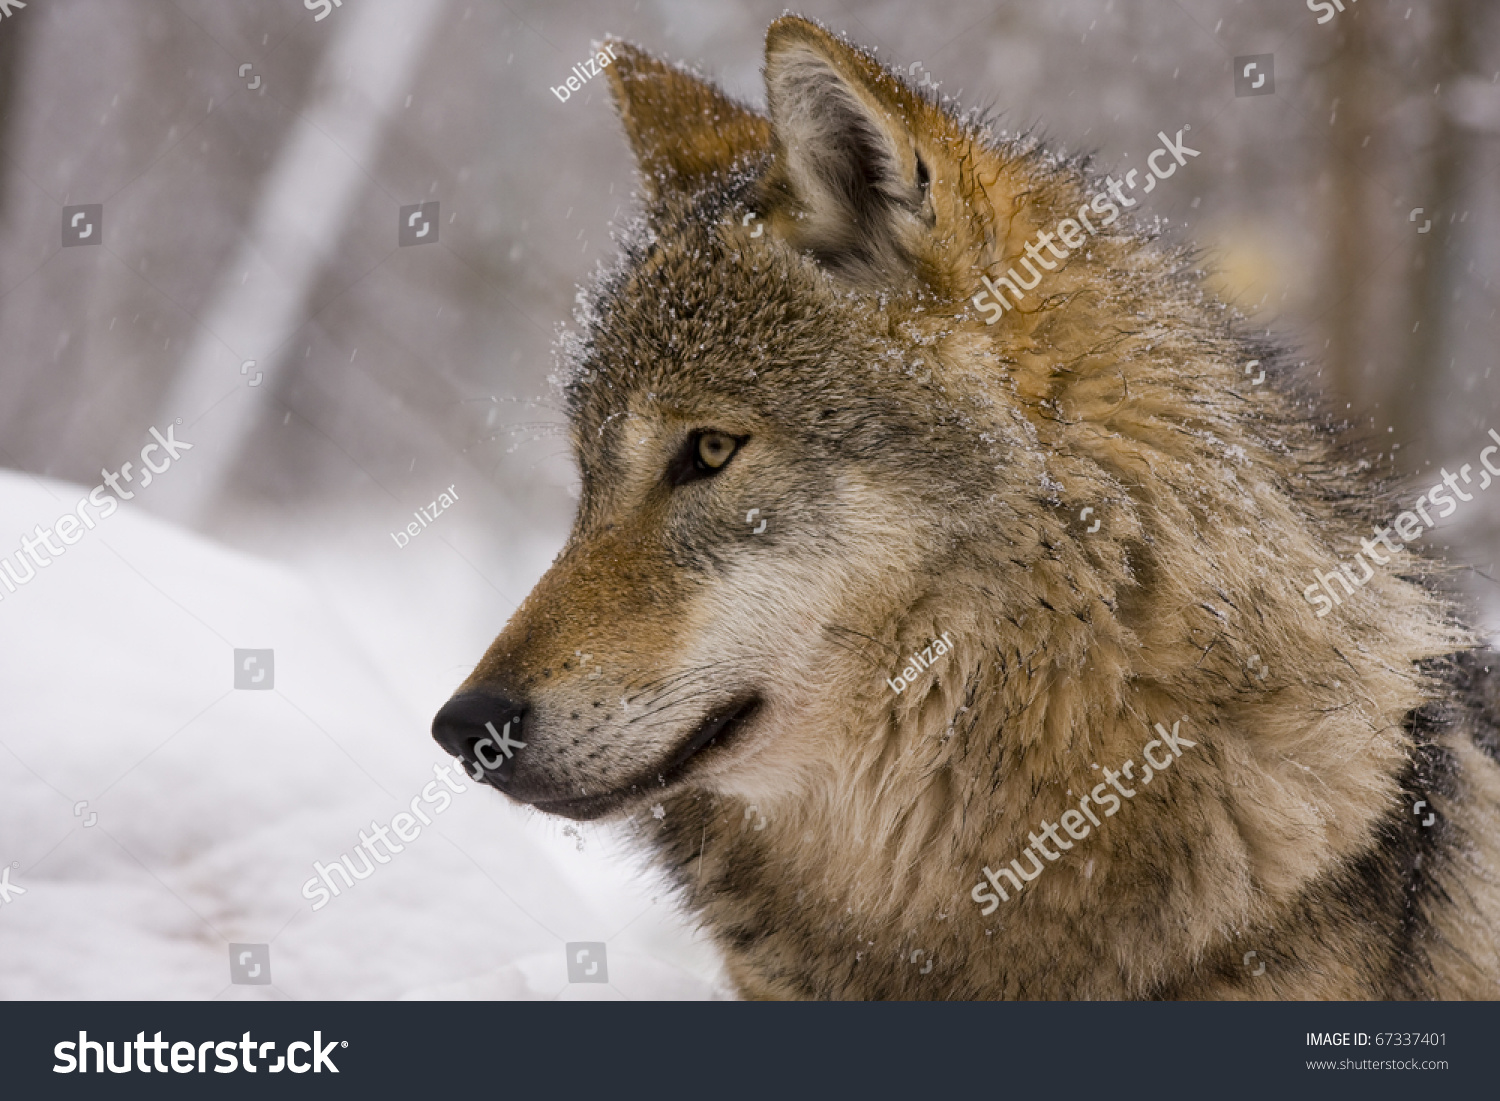 An introduction to the gray wolf or canis lupus